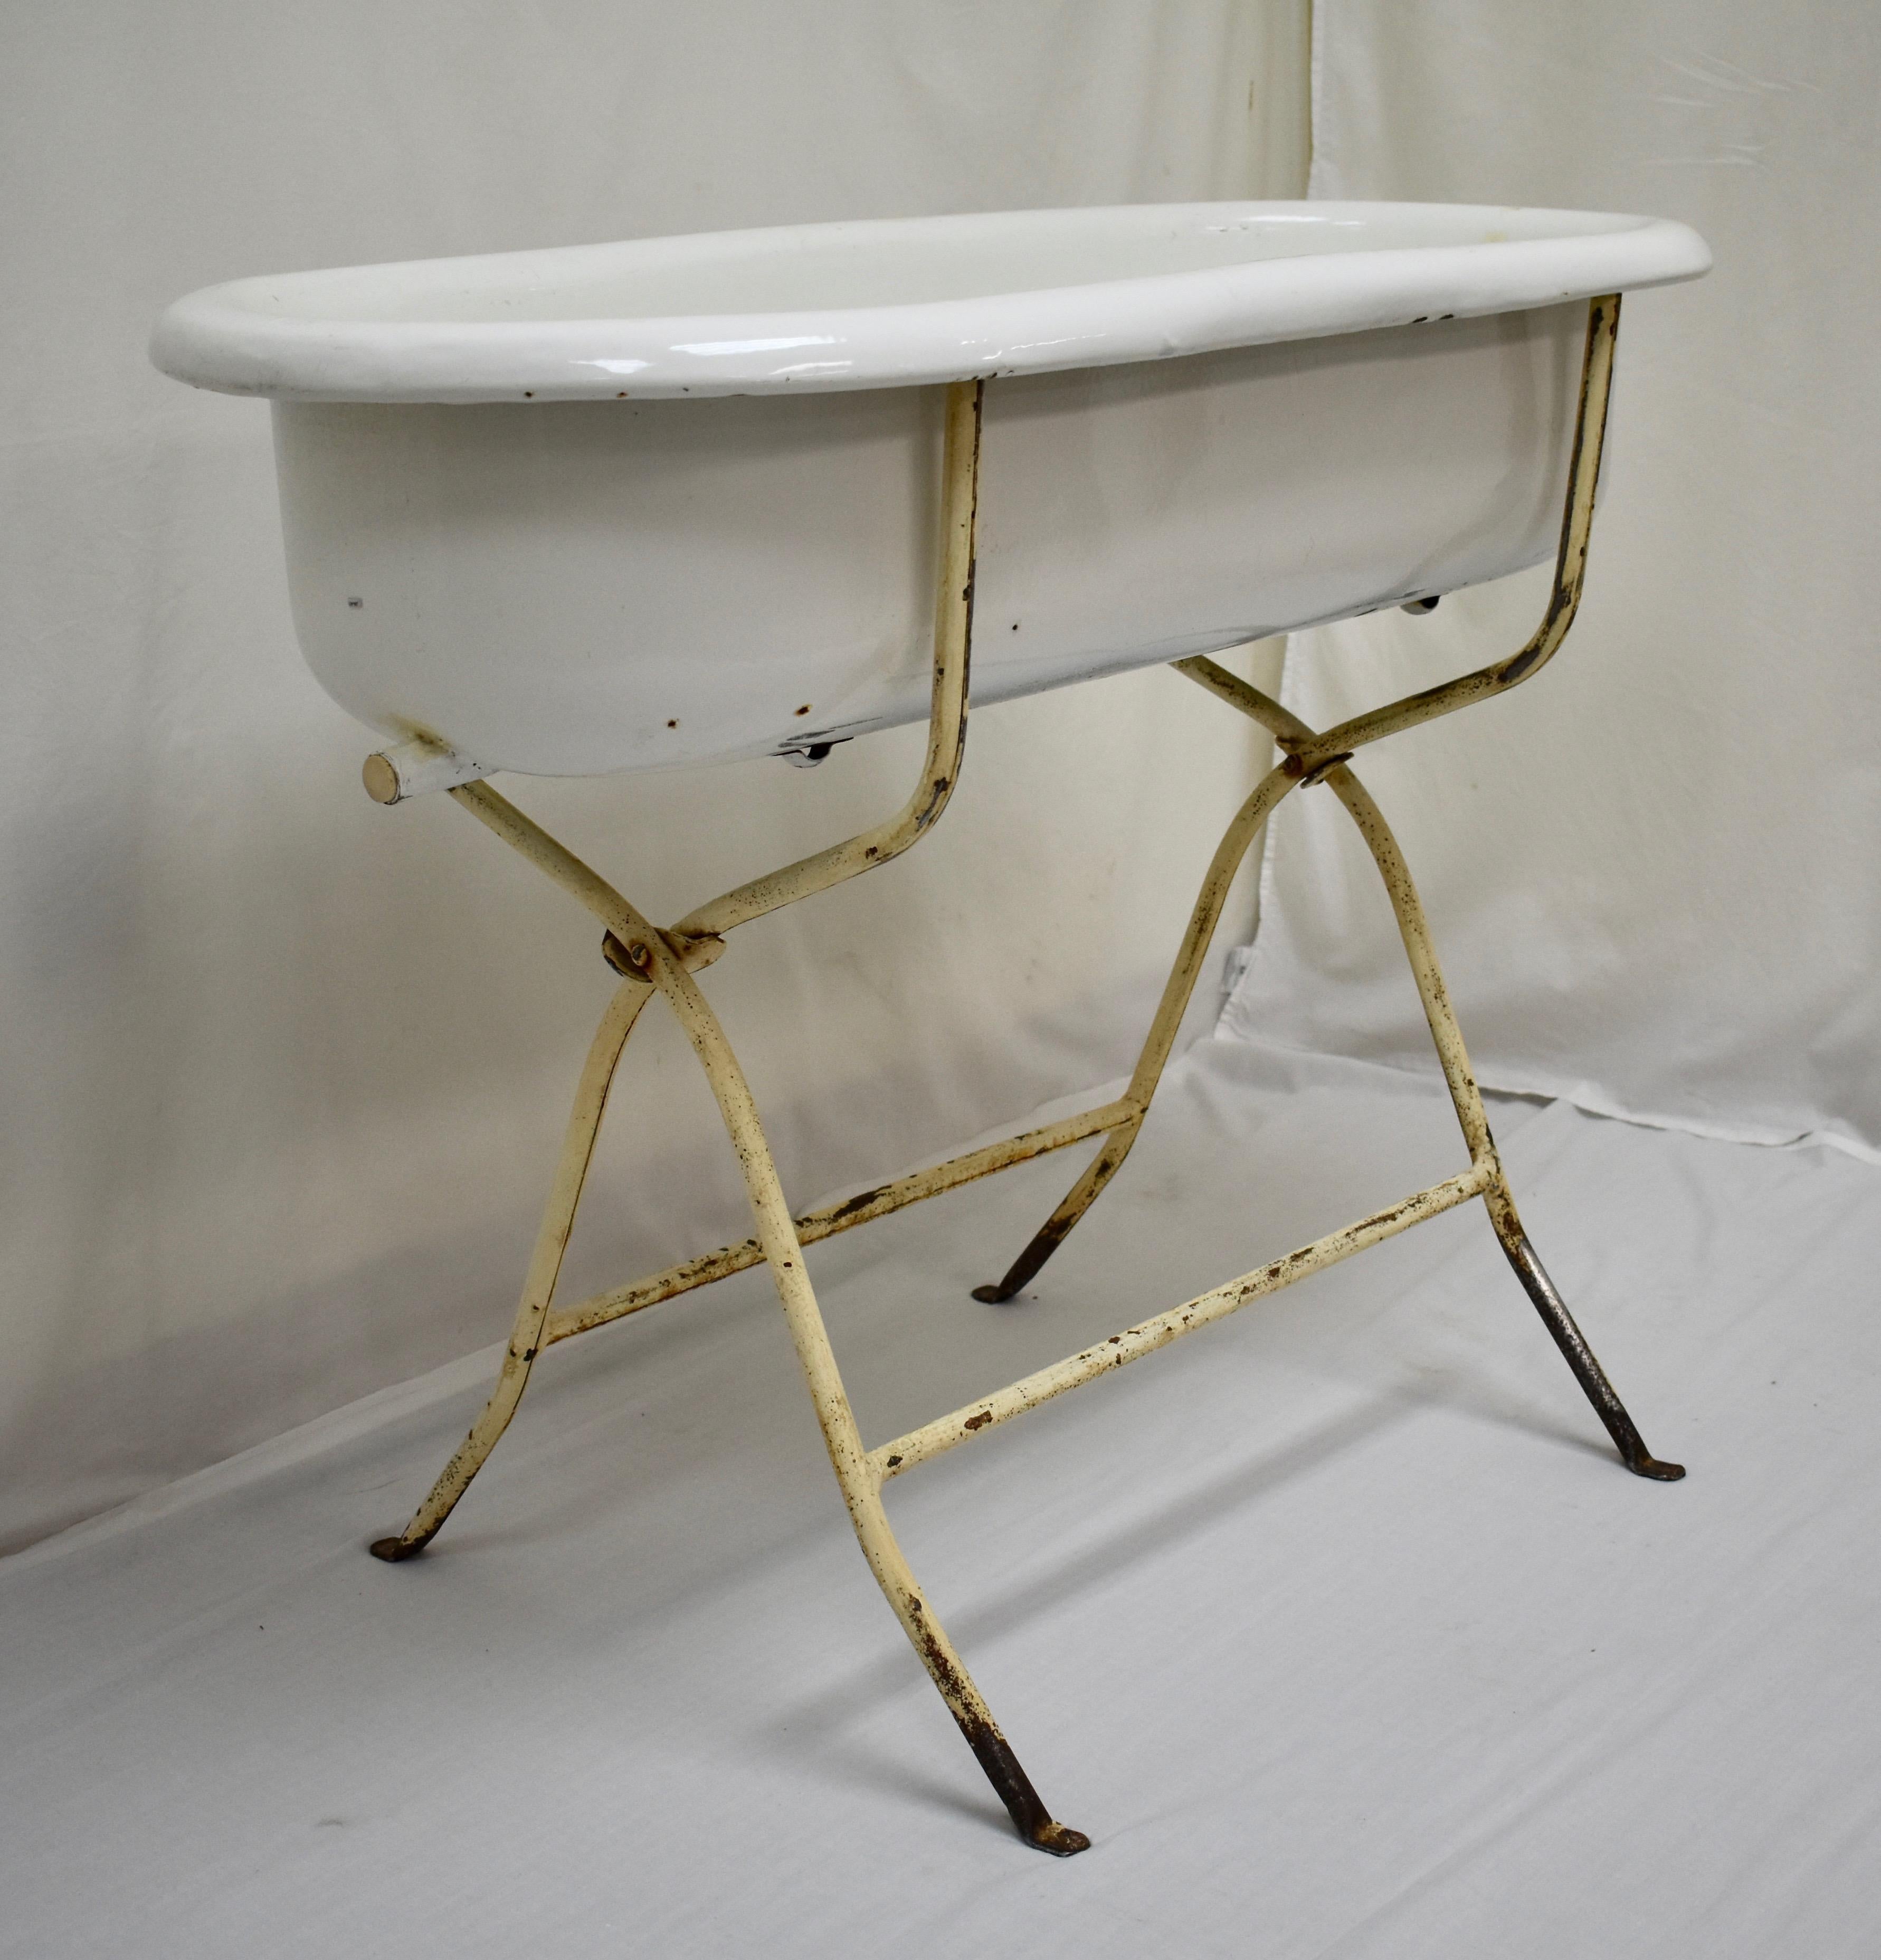 This is a vintage porcelain enamel baby bath on its original wrought iron folding stand. These are great for putting beer or wine on ice for a party, for planting and landscaping, or even for bathing the baby. This piece has a cork to replace the